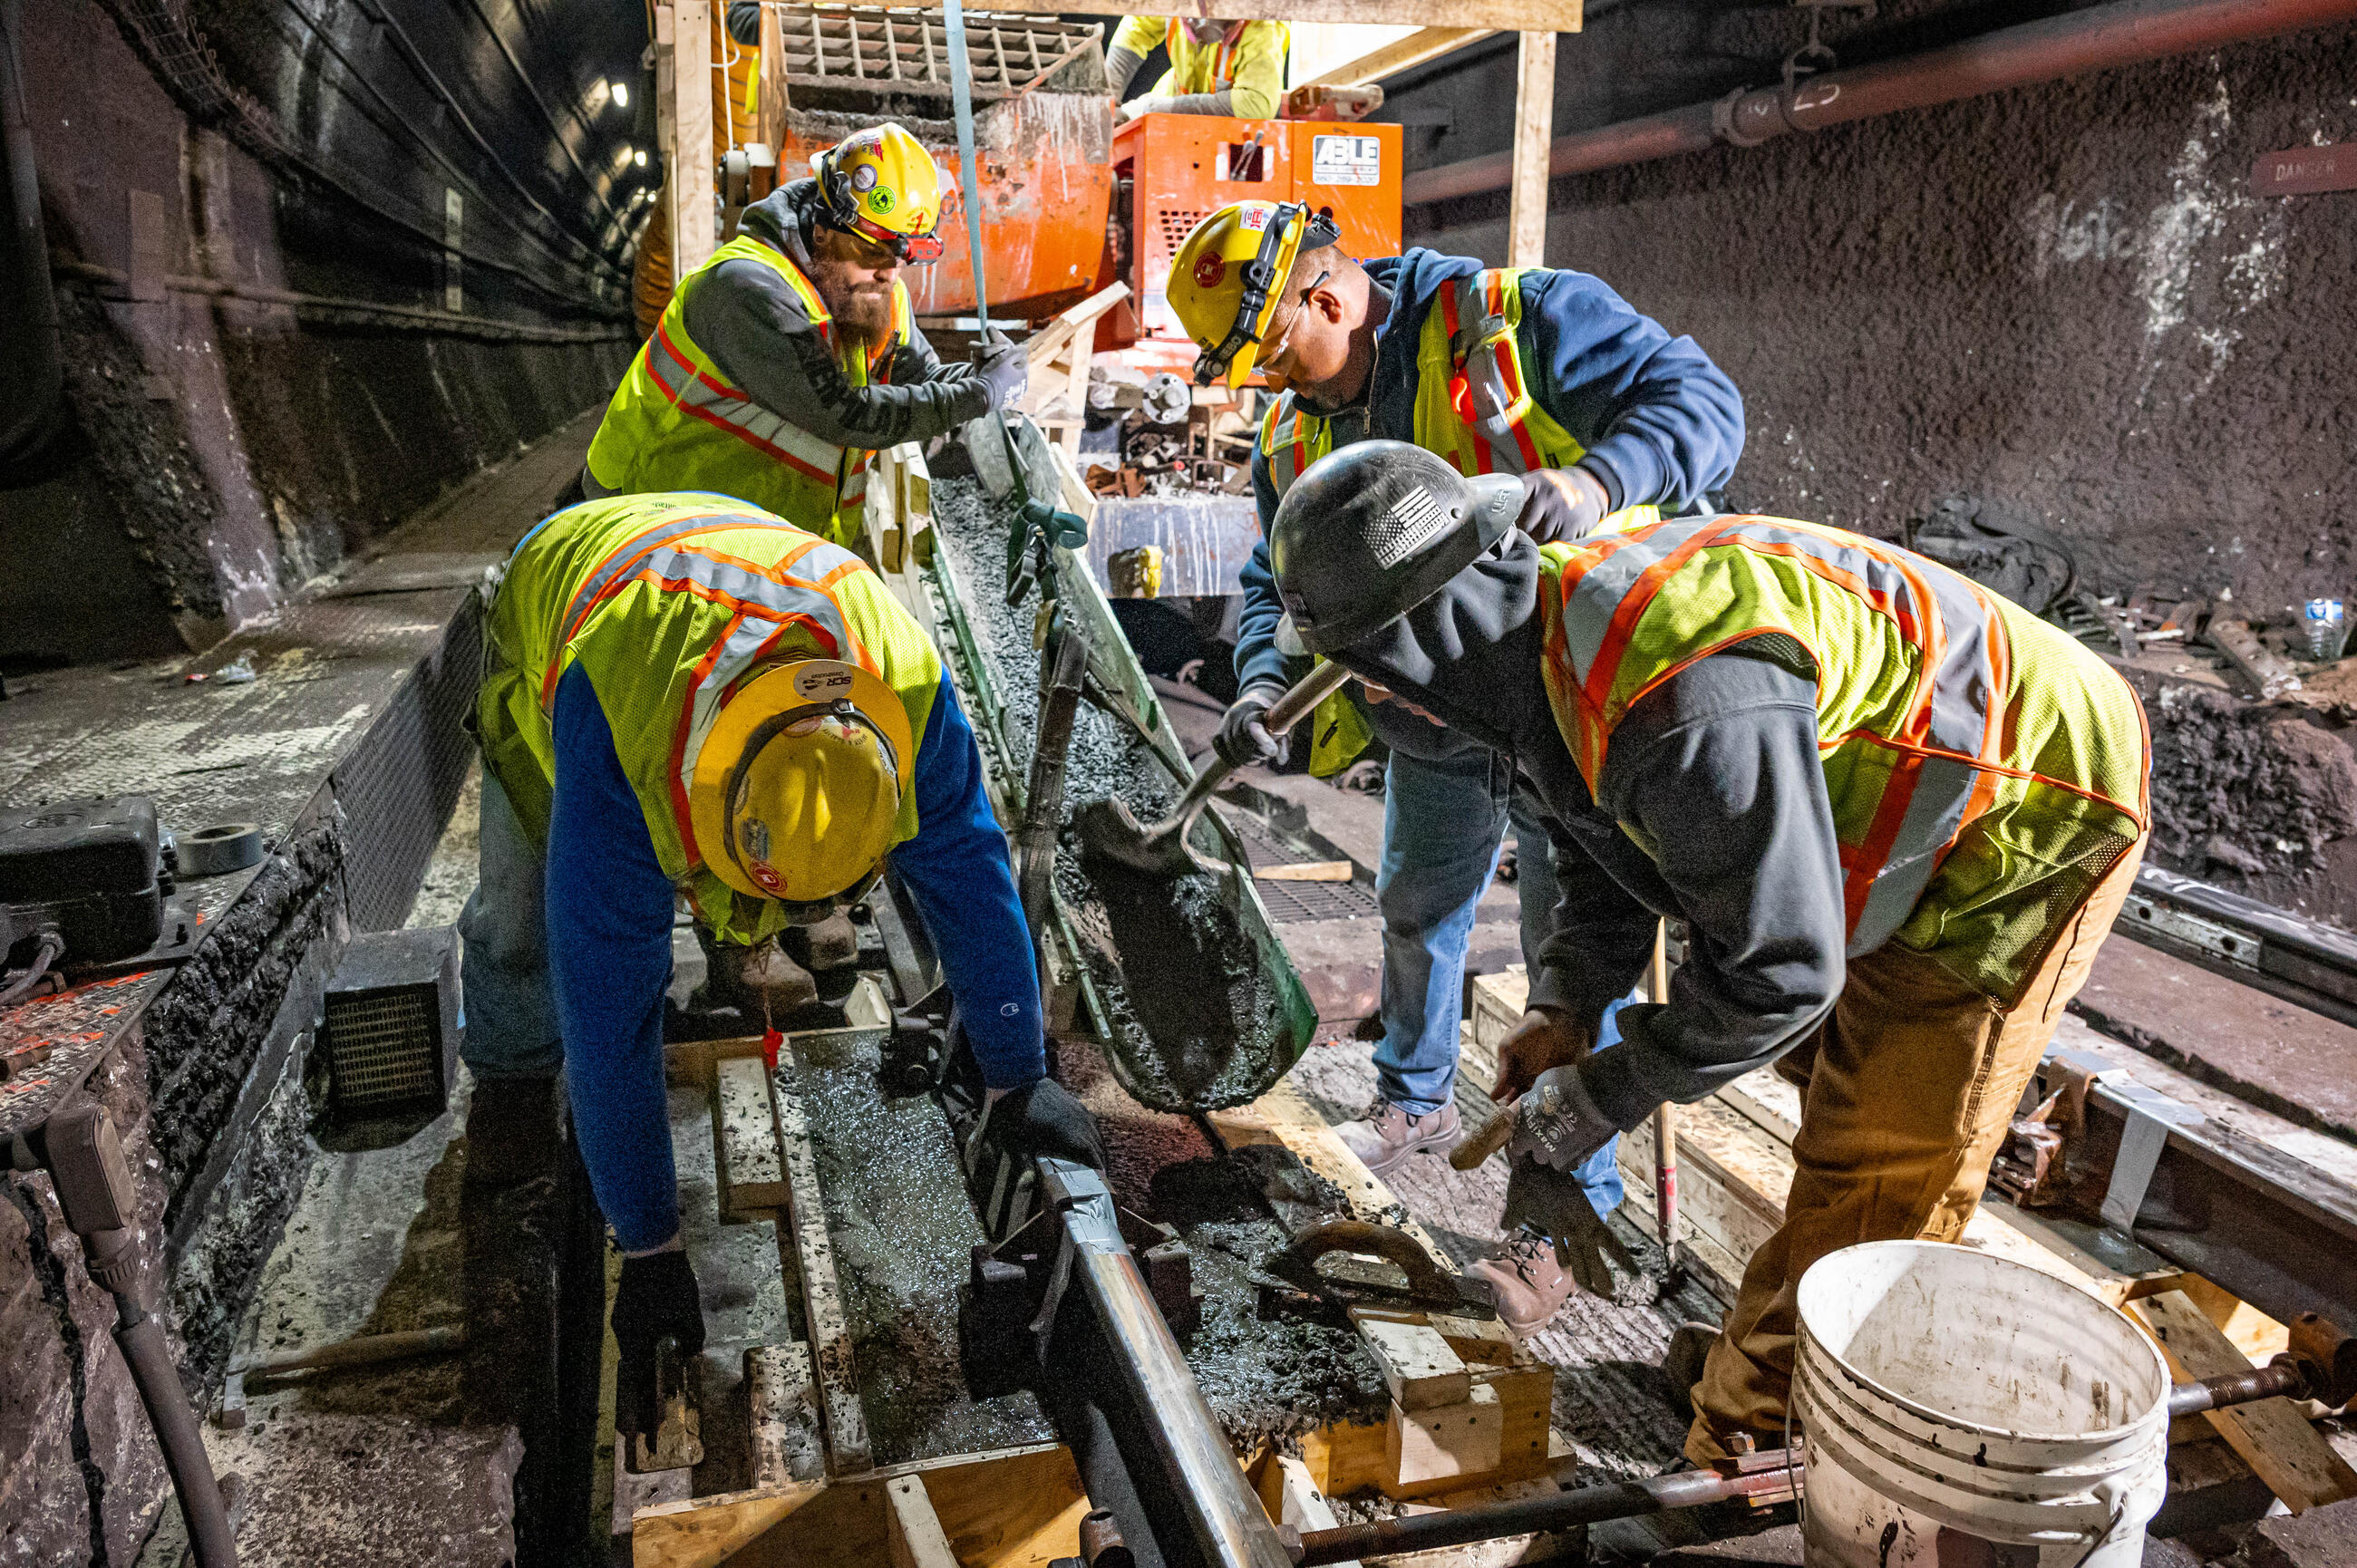 Crews repaired concrete slabs along the Red Line track area. Complimentary photo by the MBTA Customer and Employee Experience Department.